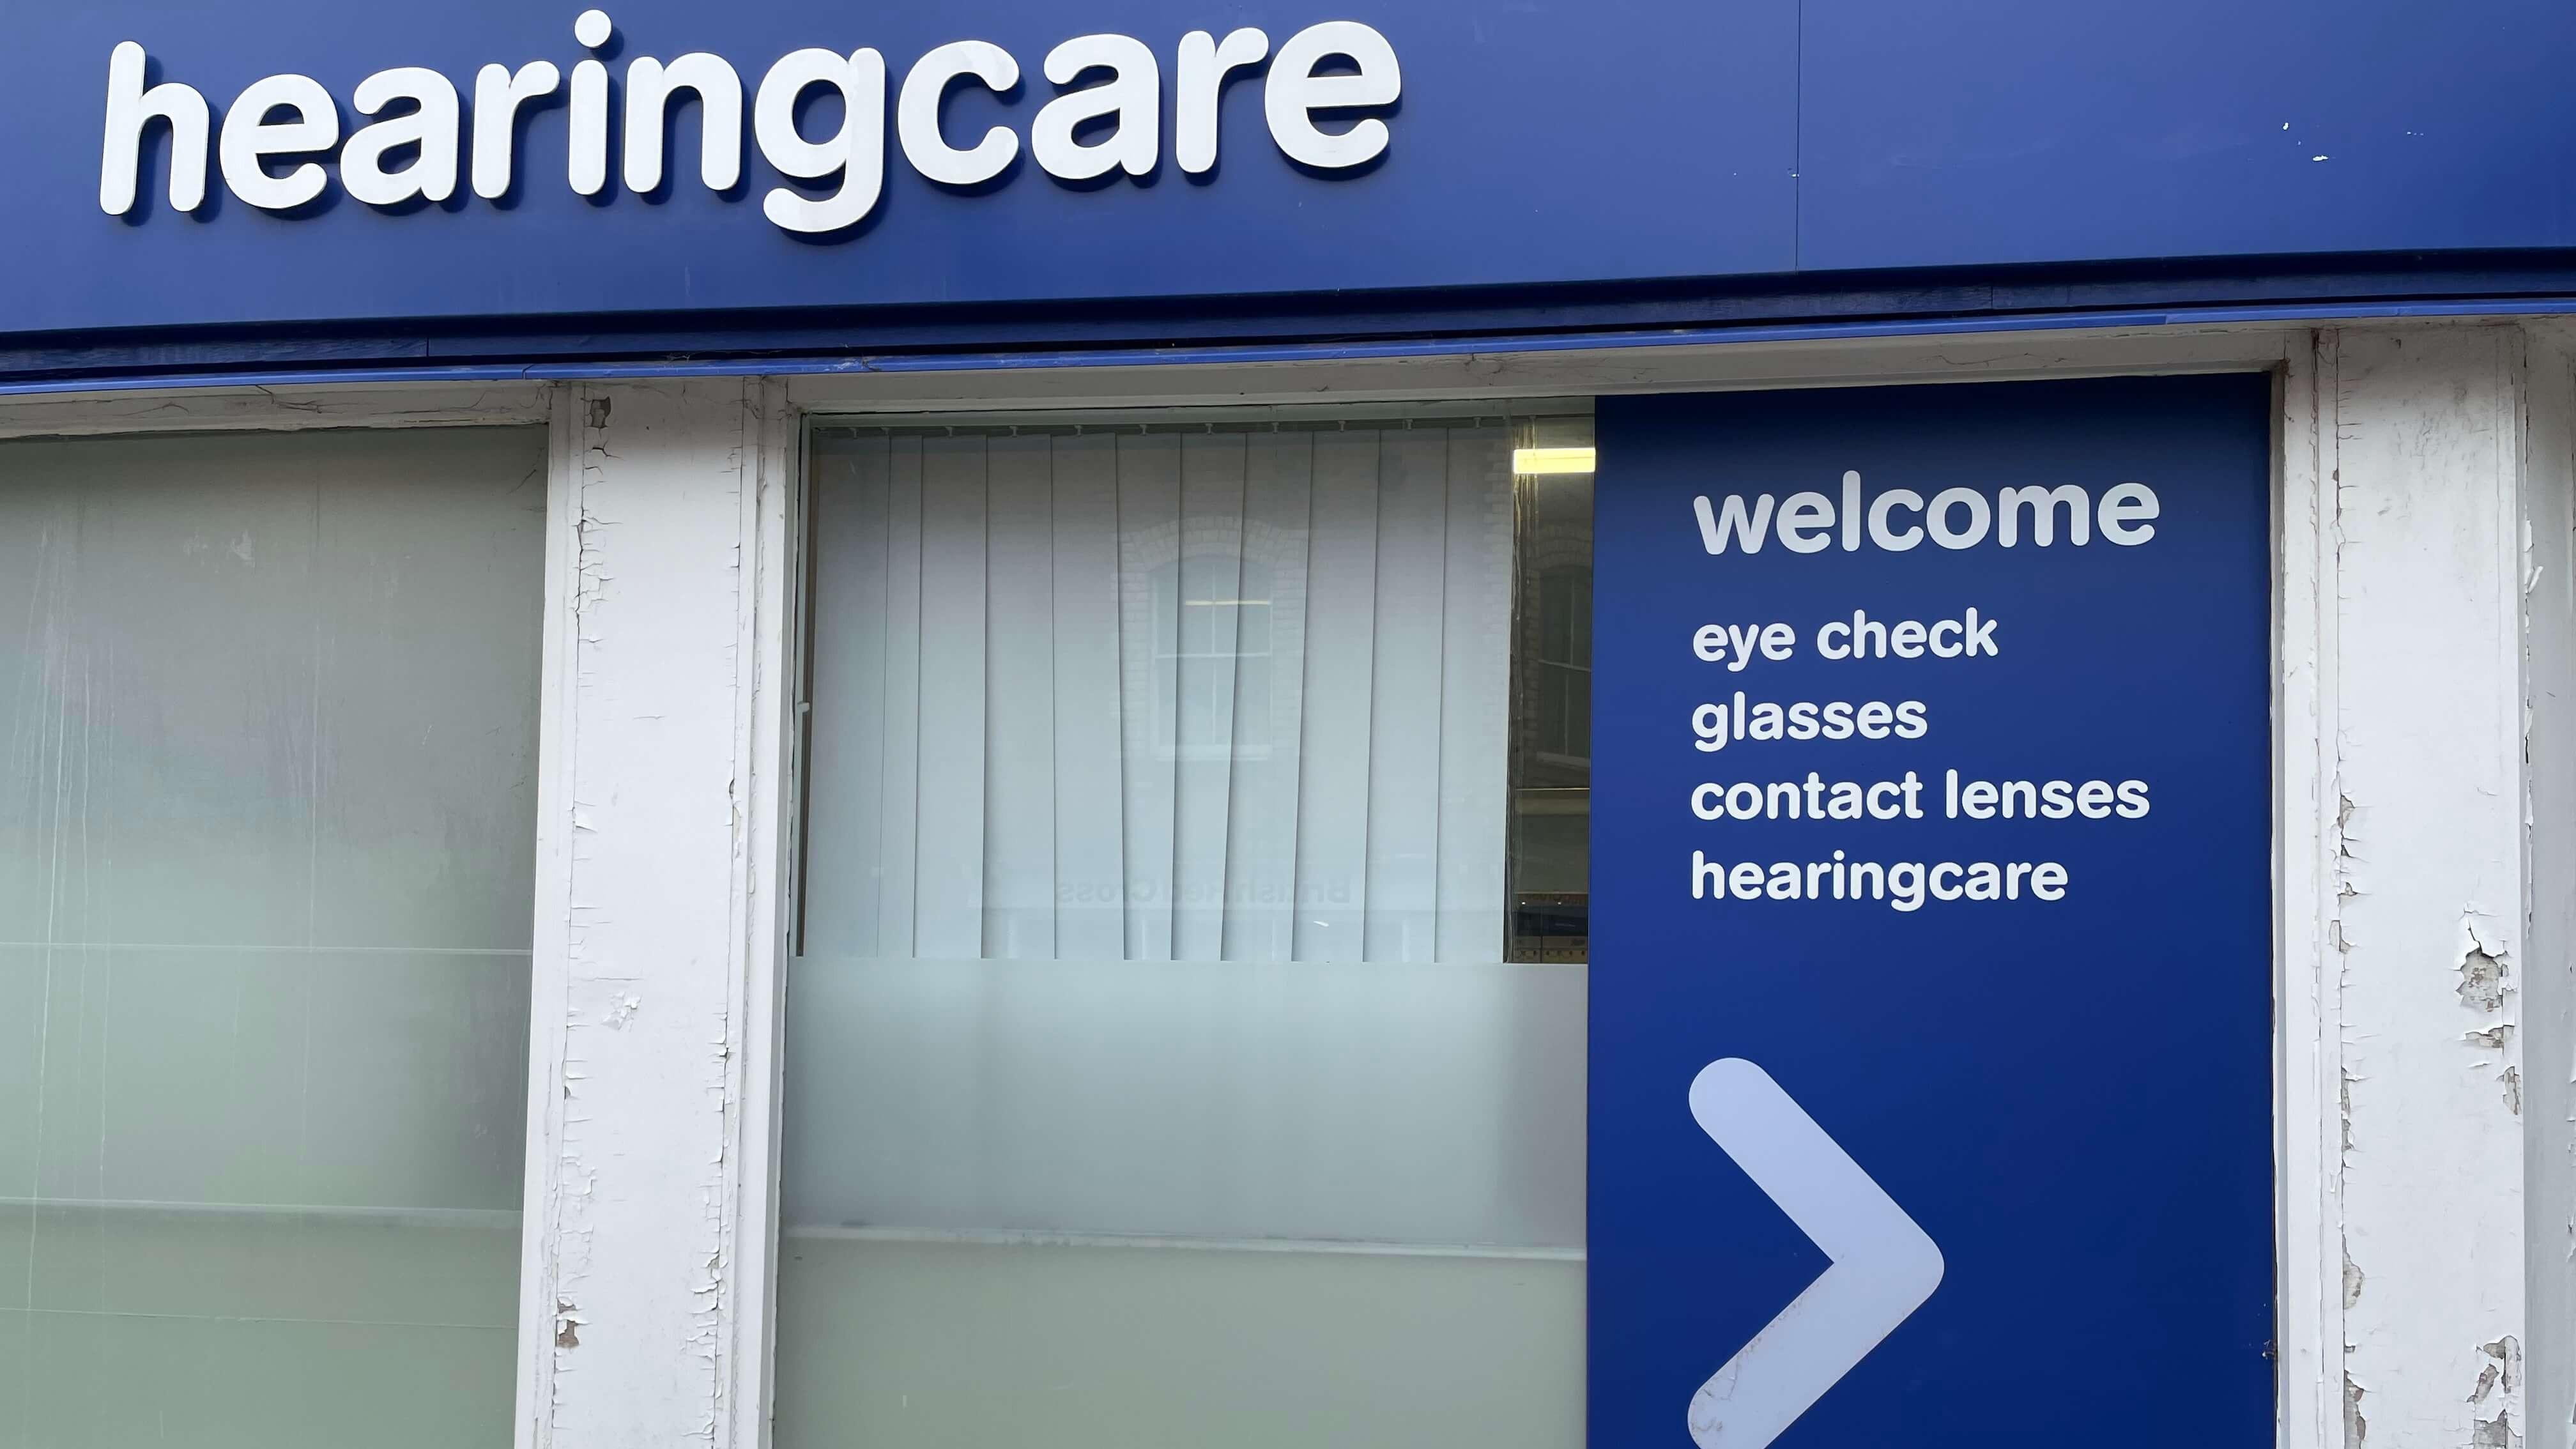 Boots Hearingcare Boots Hearingcare Cirencester Cirencester 03452 701600